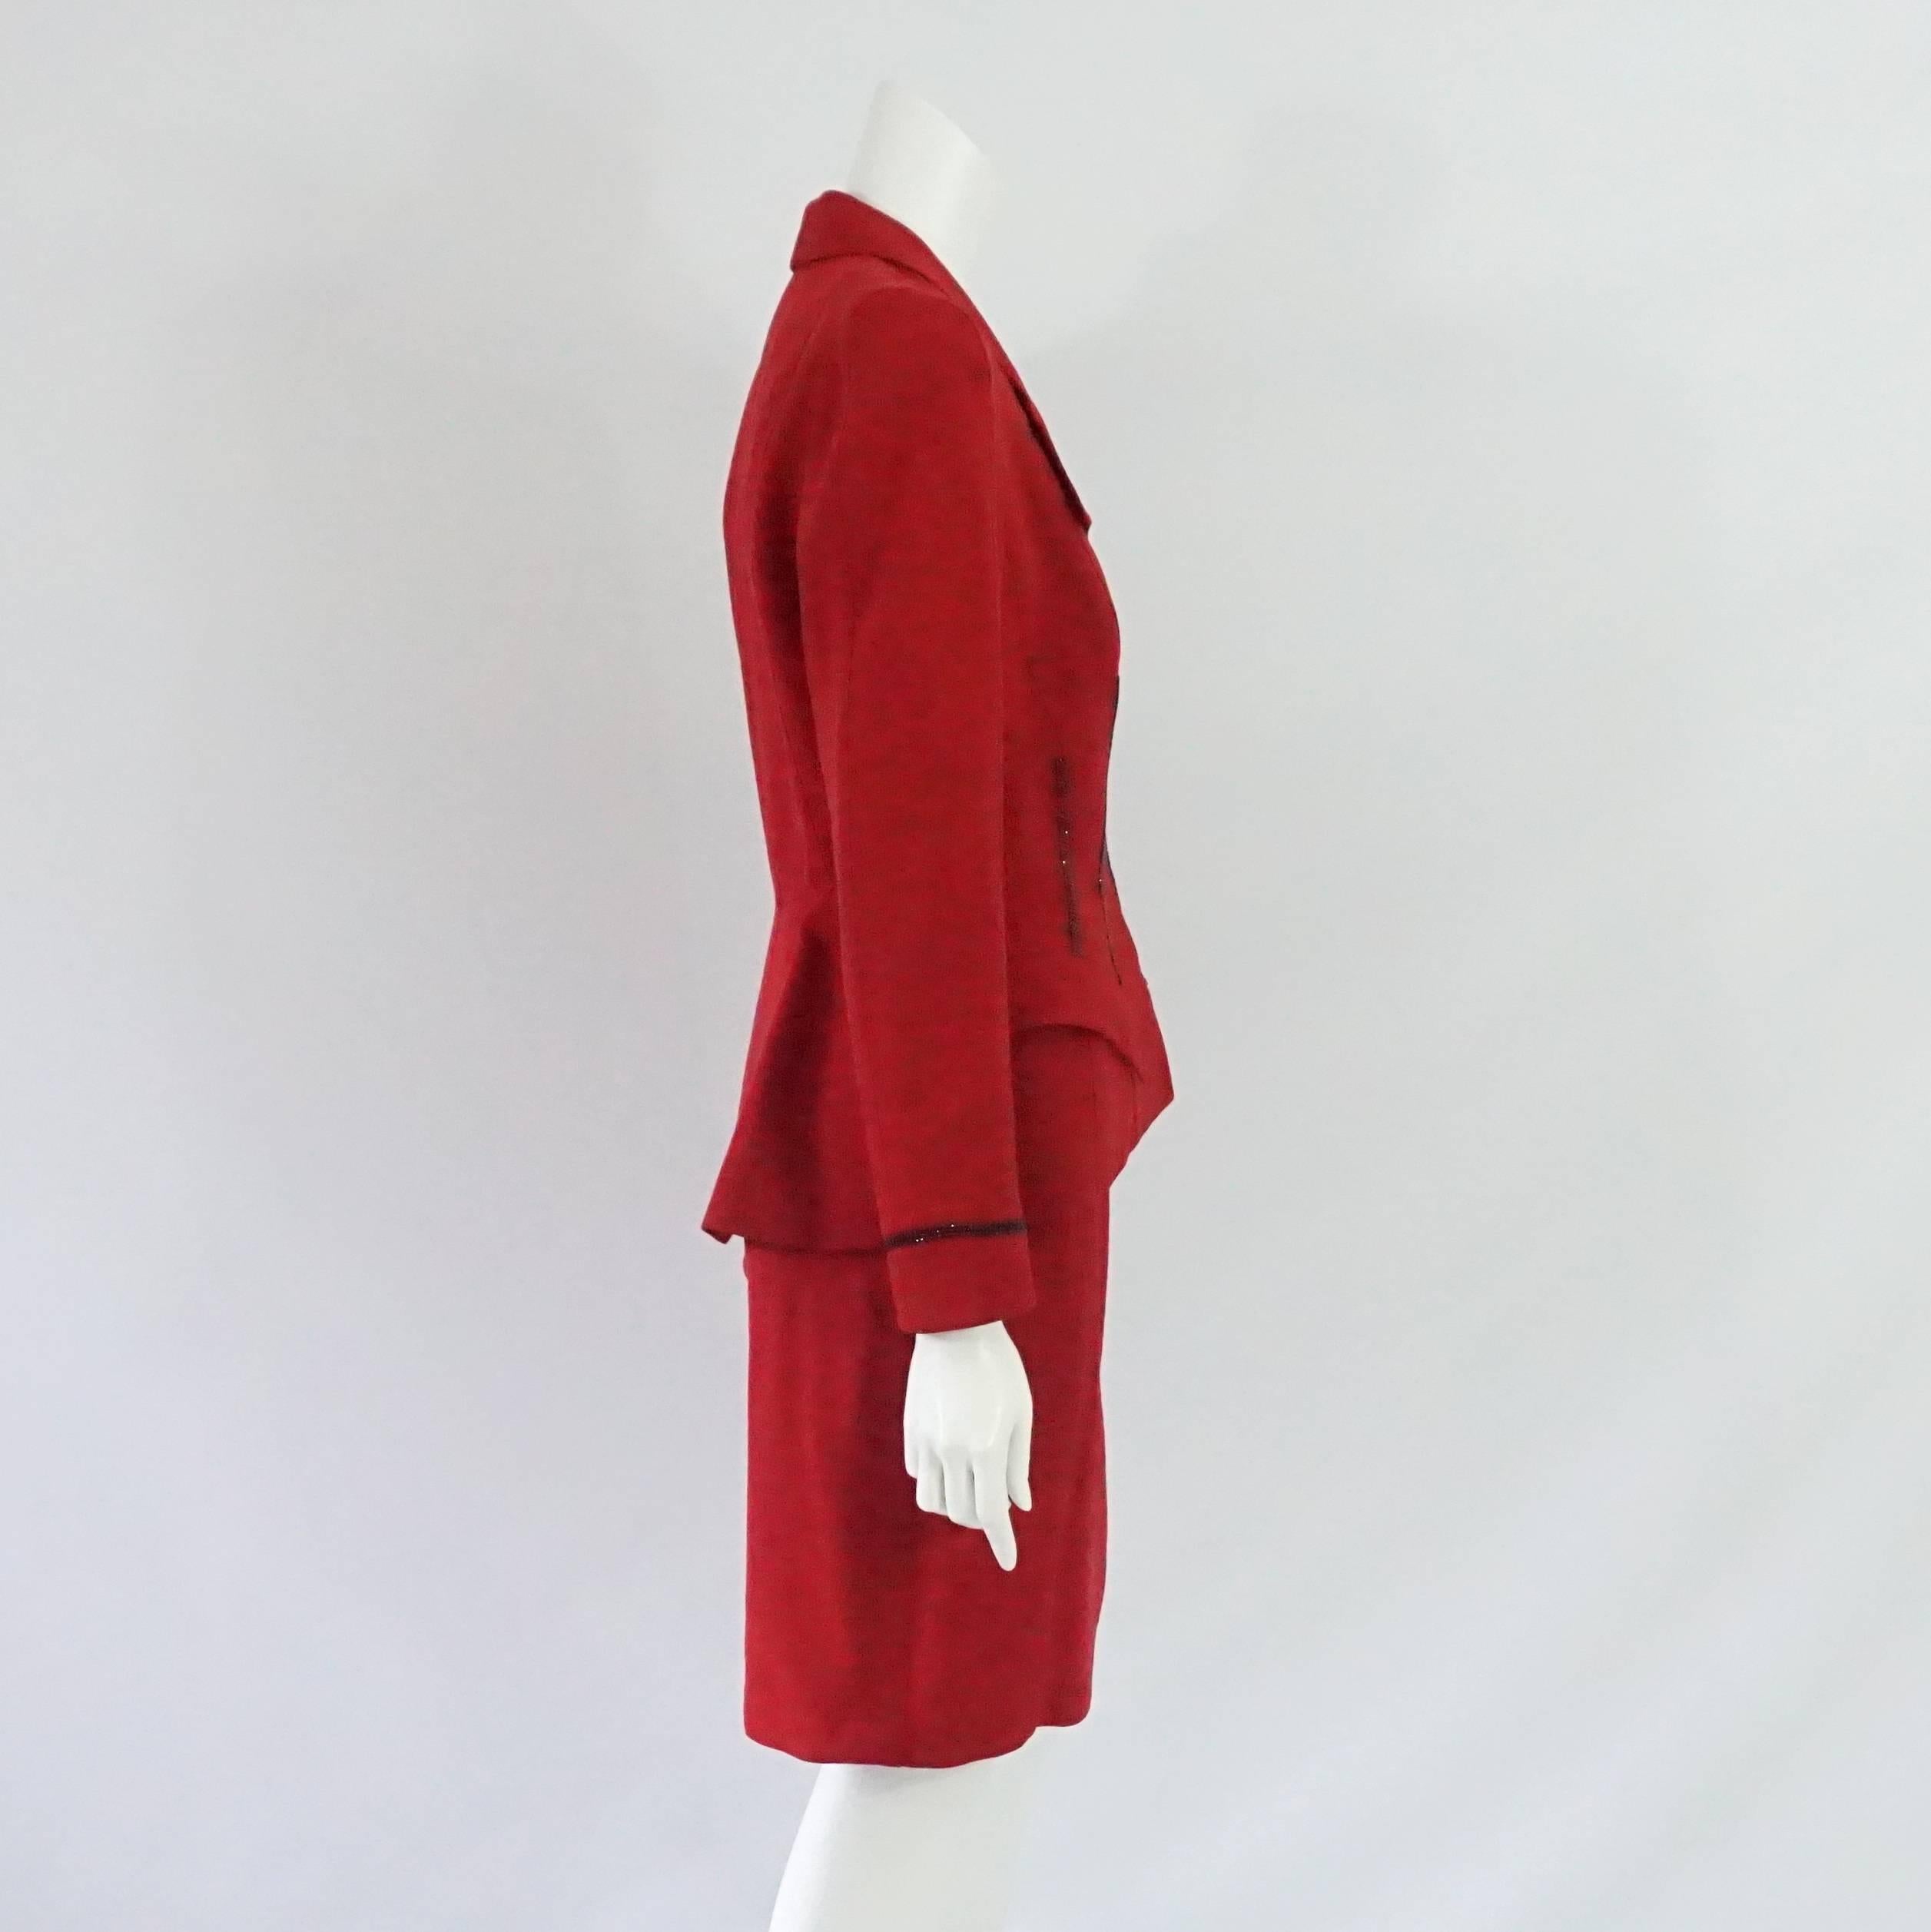 This Thierry Mugler red wool skirt suit has rhinestone detailing on the front and cuffs. There are 2 angular pockets on the front, a collar, and shoulder pads. This skirt suit is in very good condition.

Jacket Measurements
Shoulder to